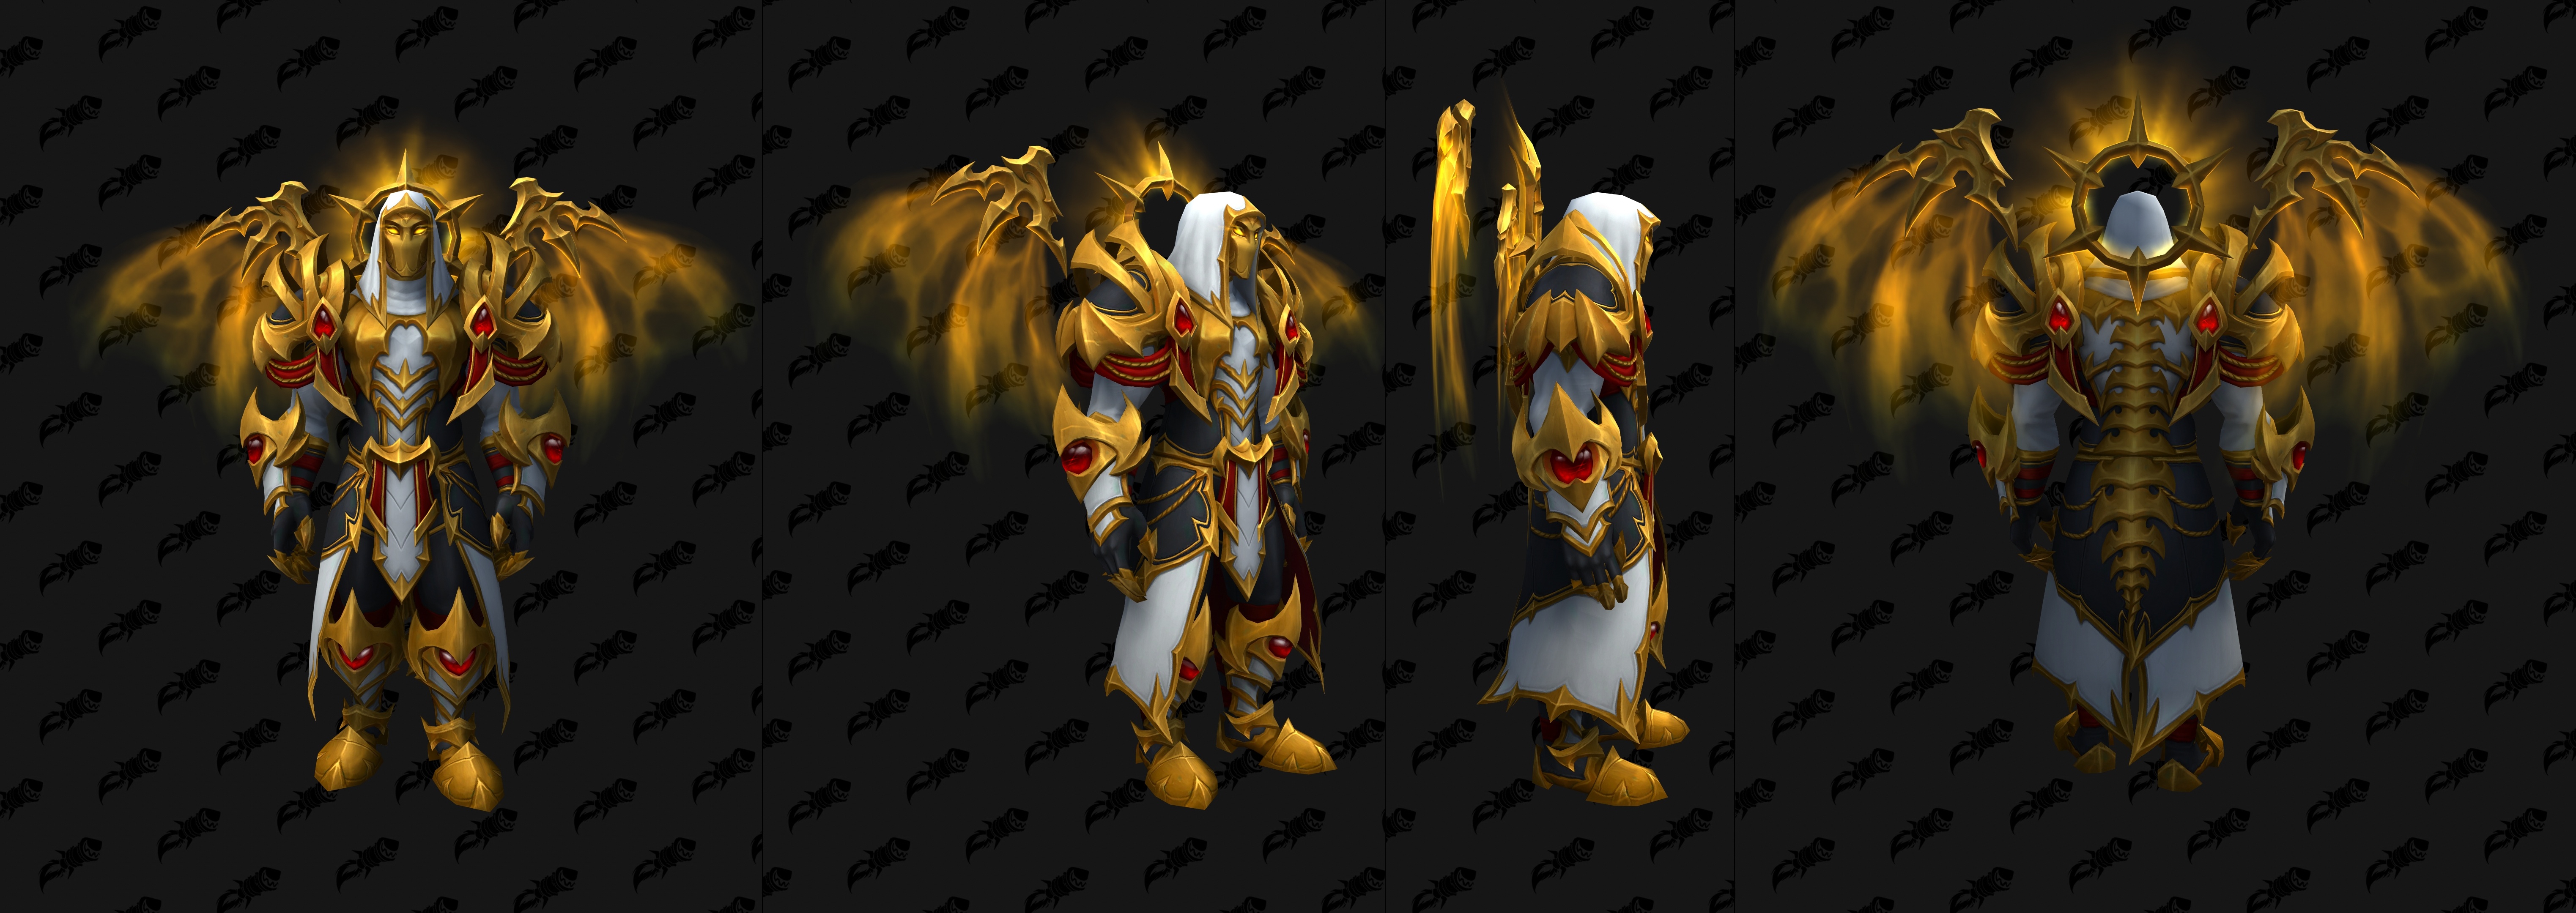 What's the best transmog you've ever seen? - #14 by Nickaeladin-thrall ...